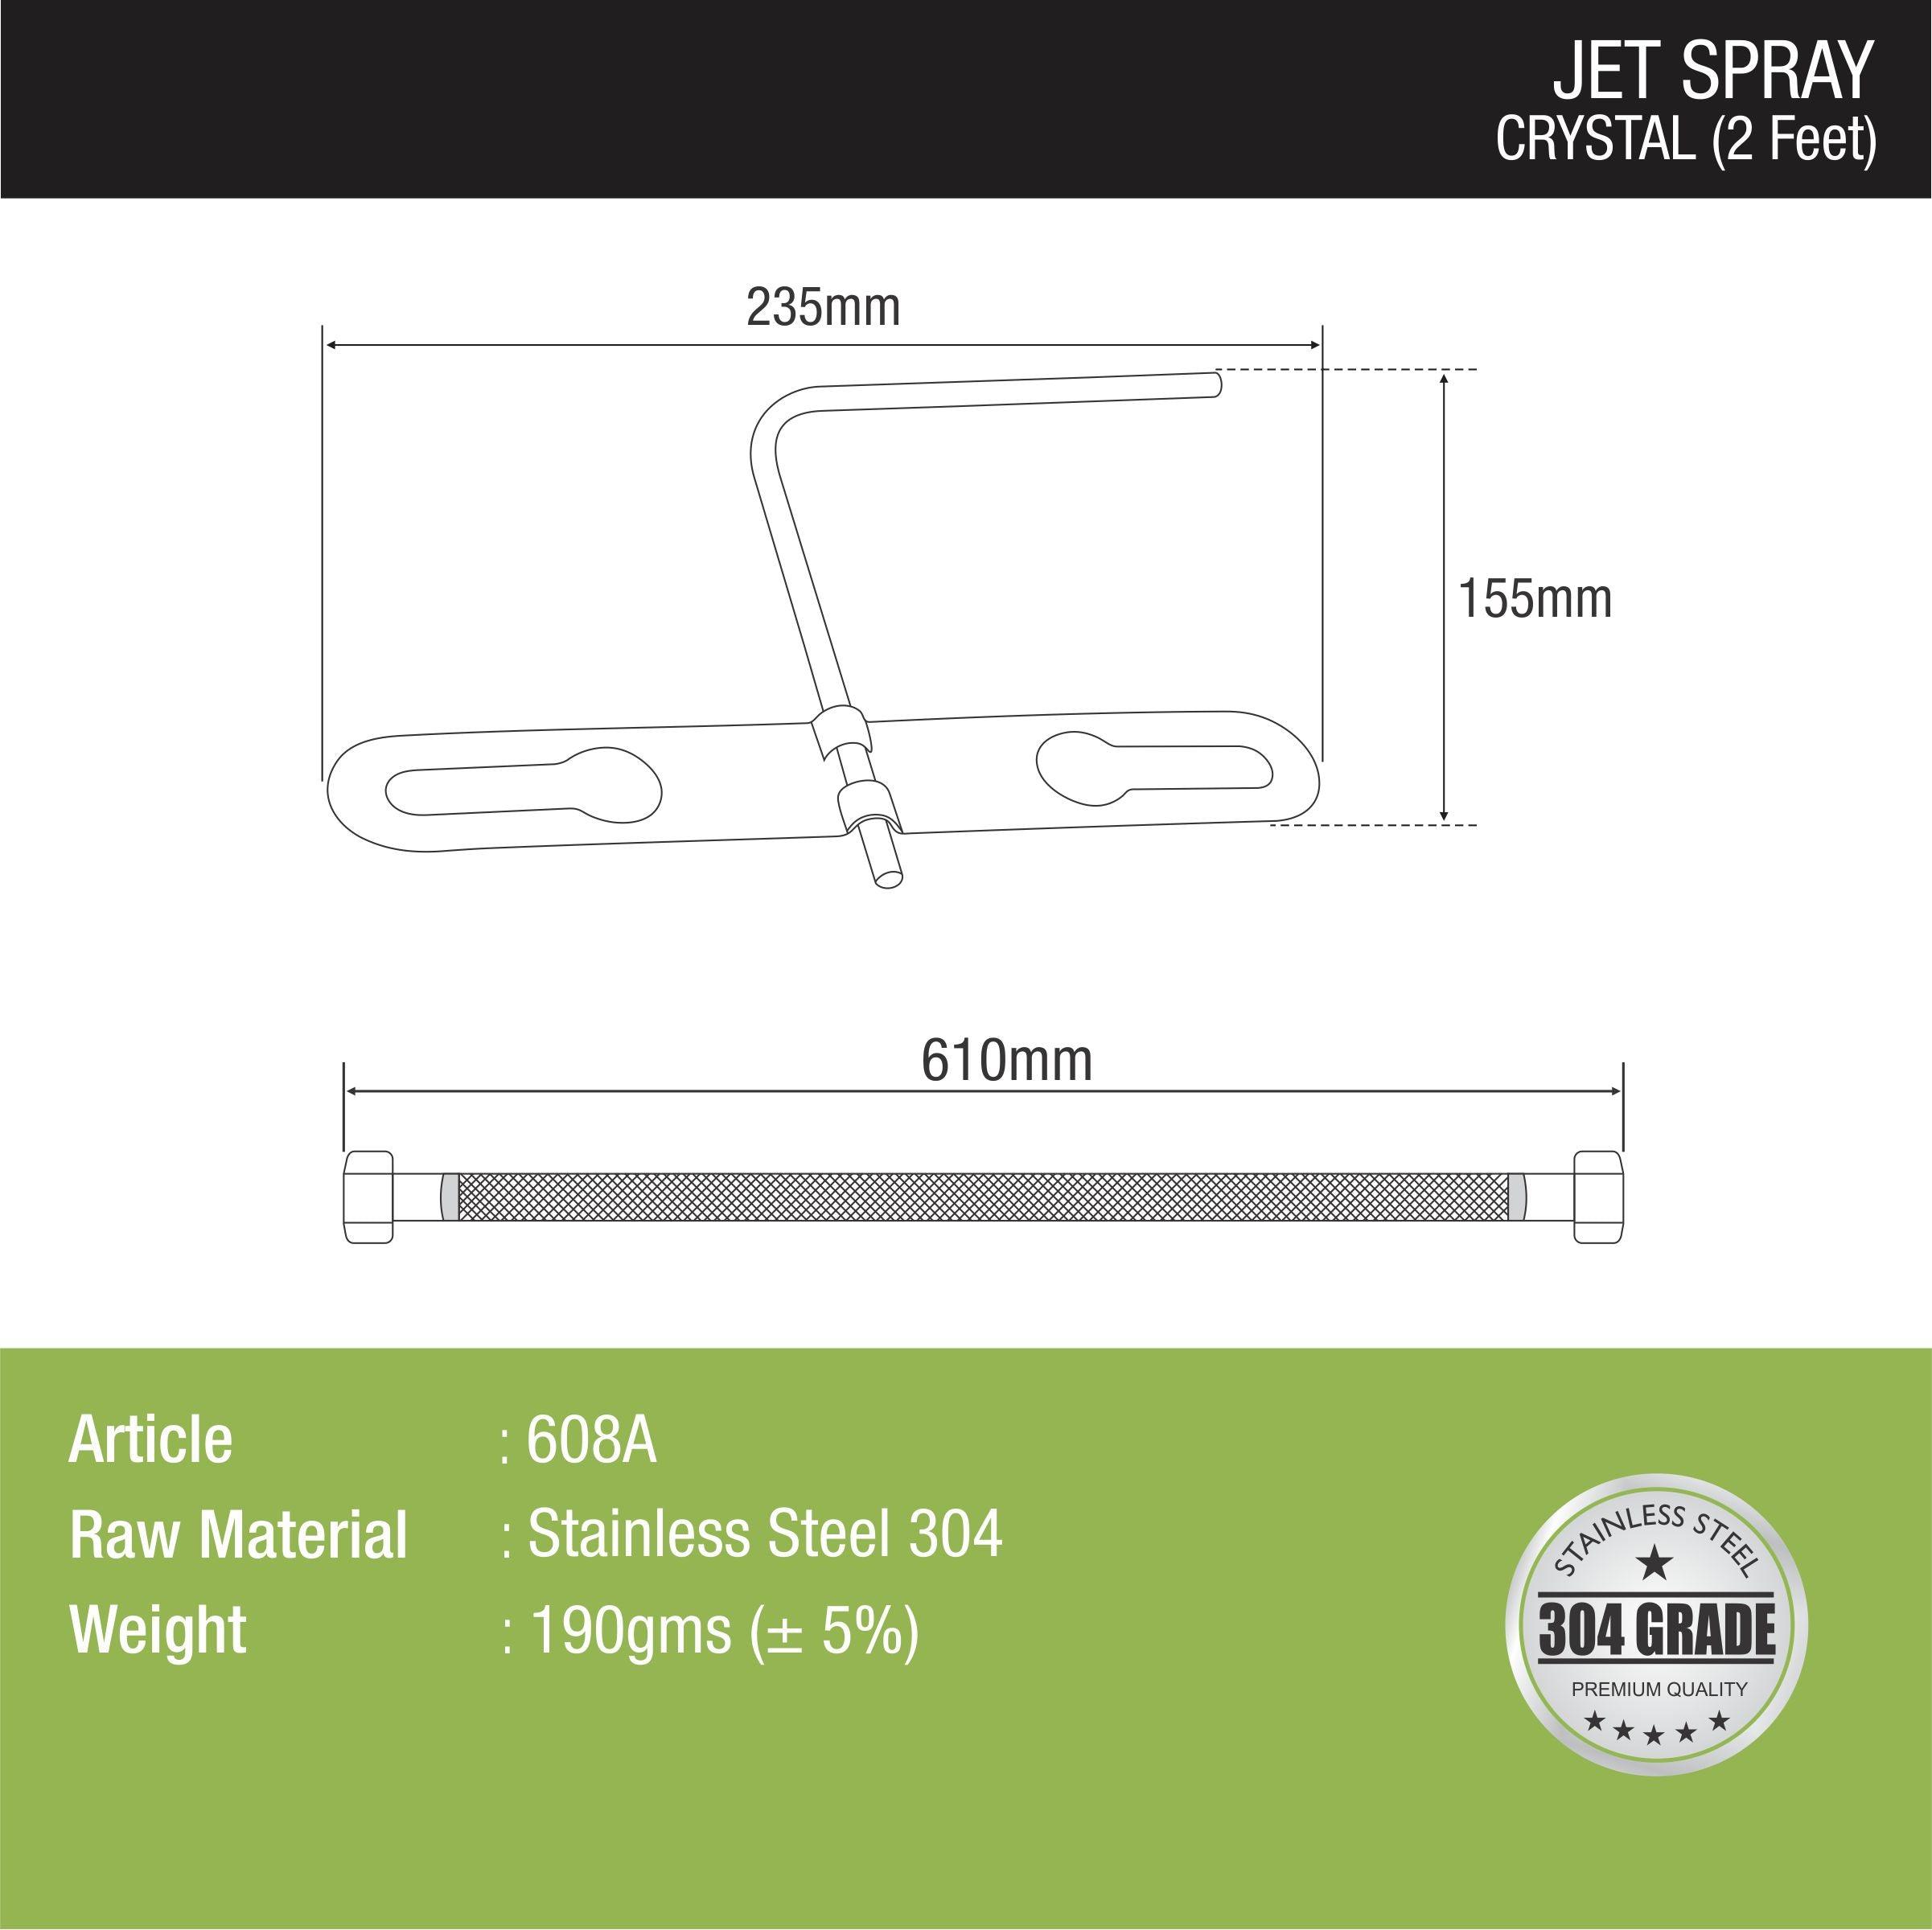 Crystal Jet Spray with 304SS Holder & 2 Feet Hose dimensions and sizes